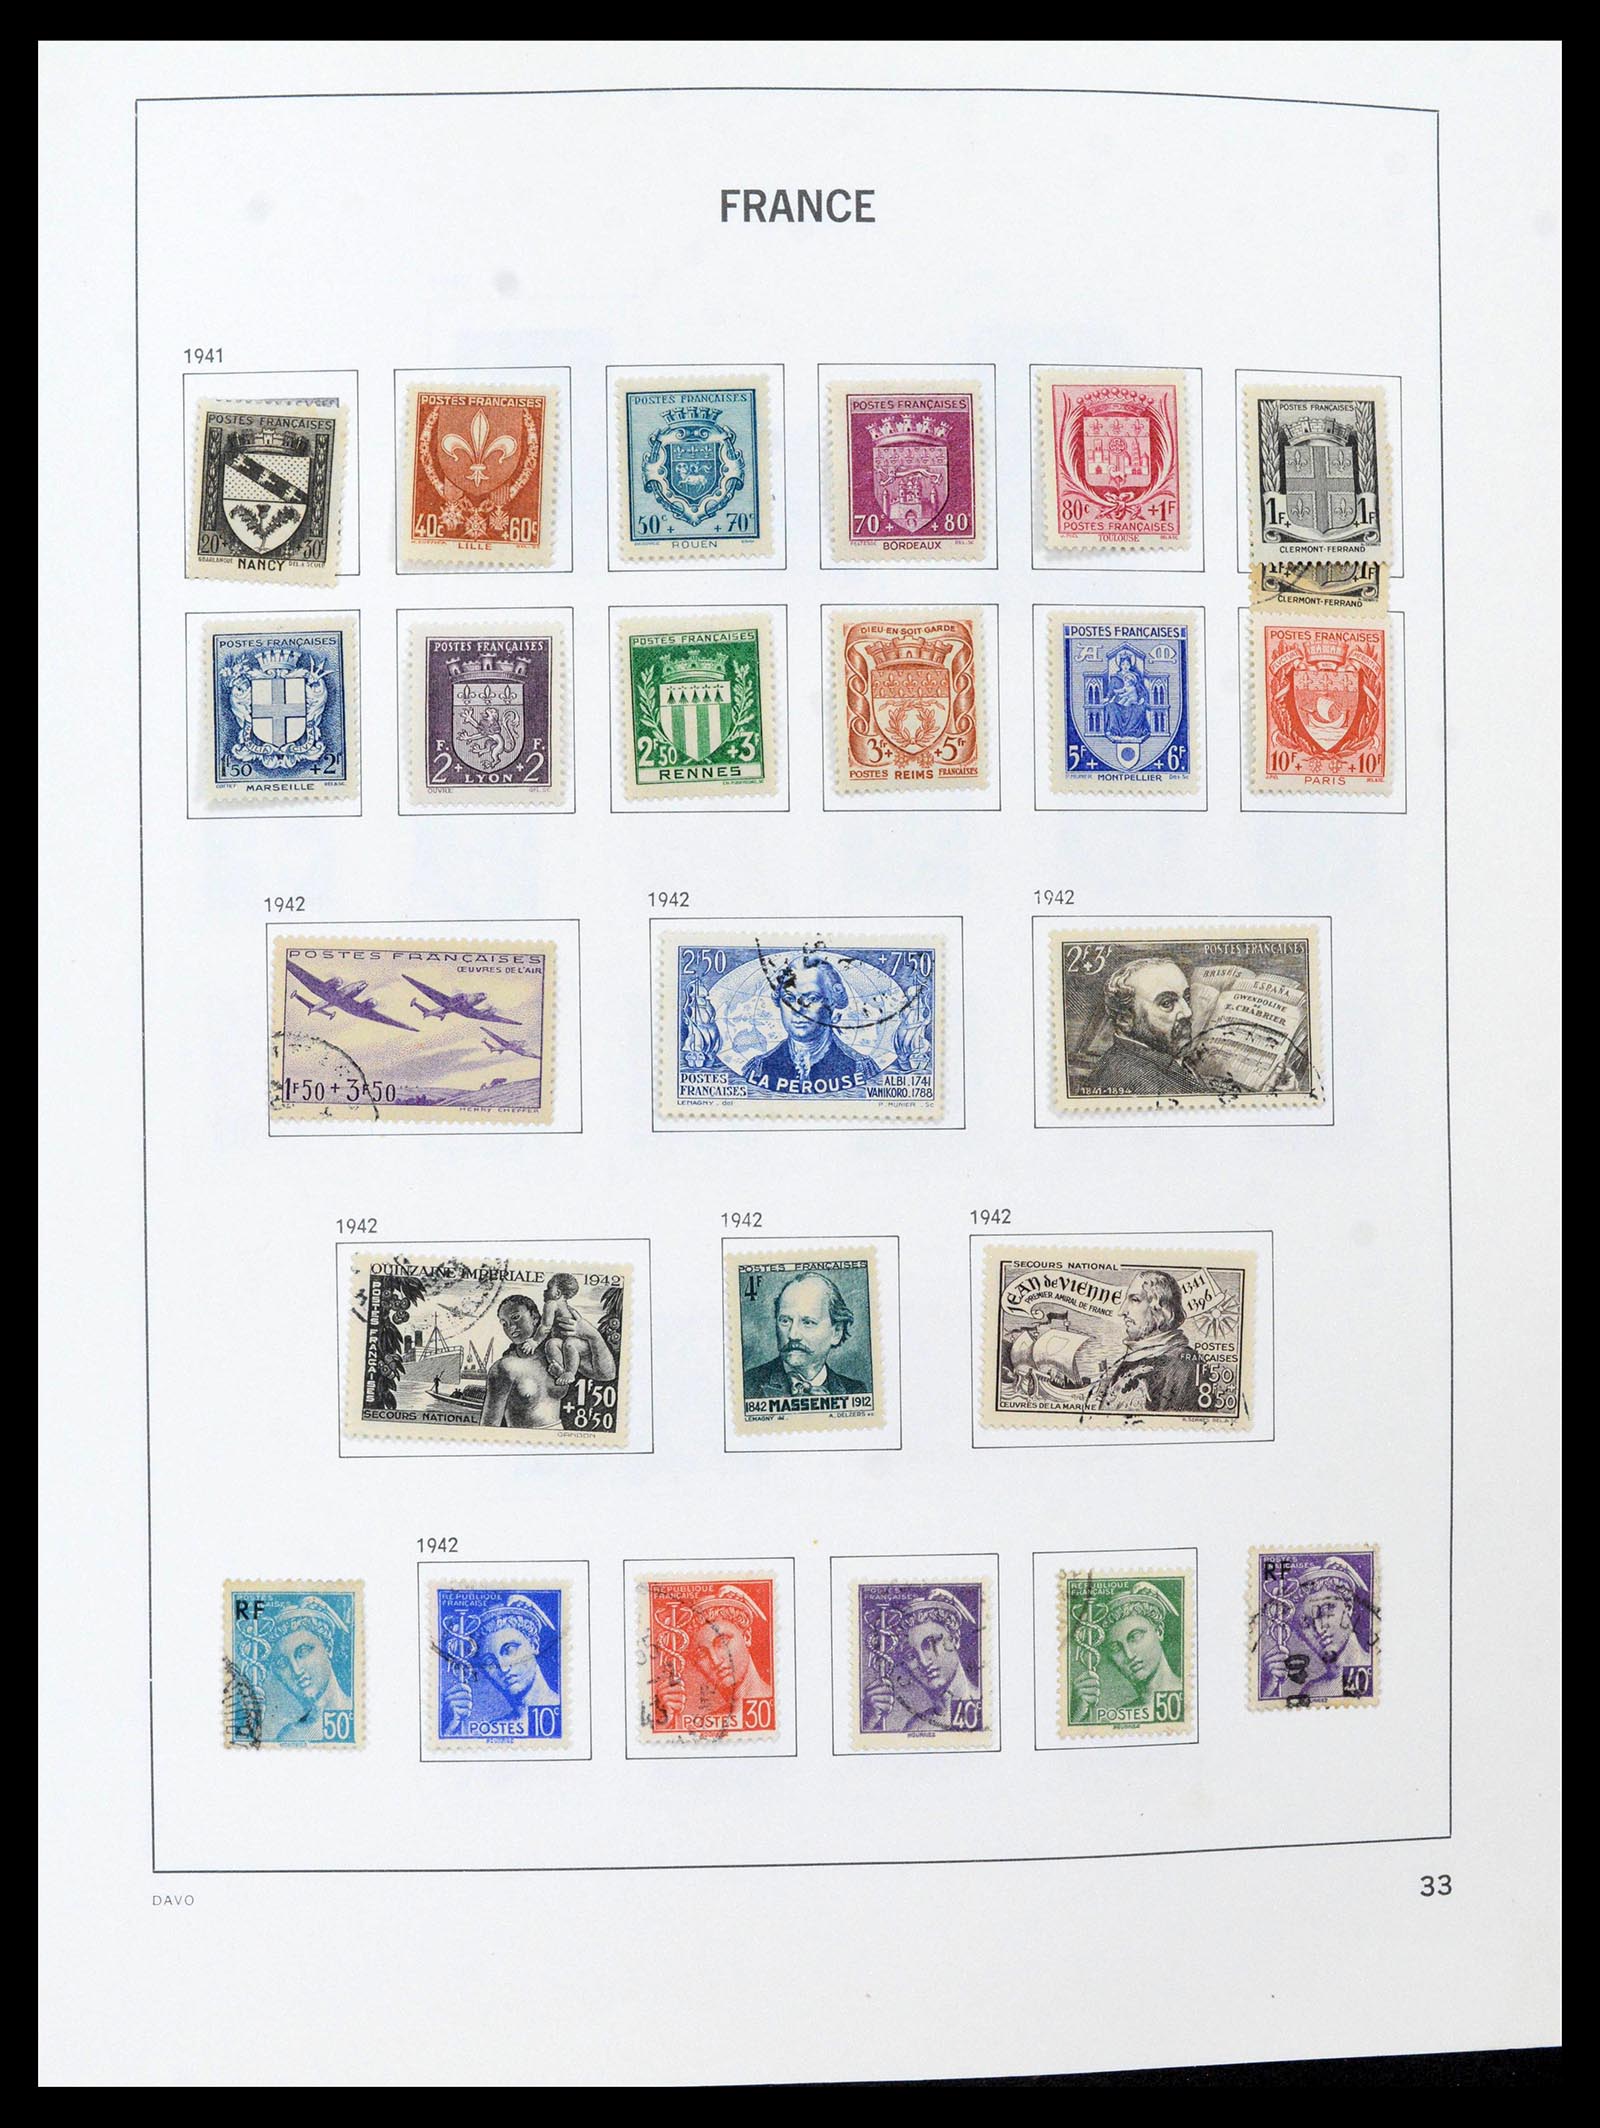 39164 0033 - Stamp collection 39164 France 1849-1981.